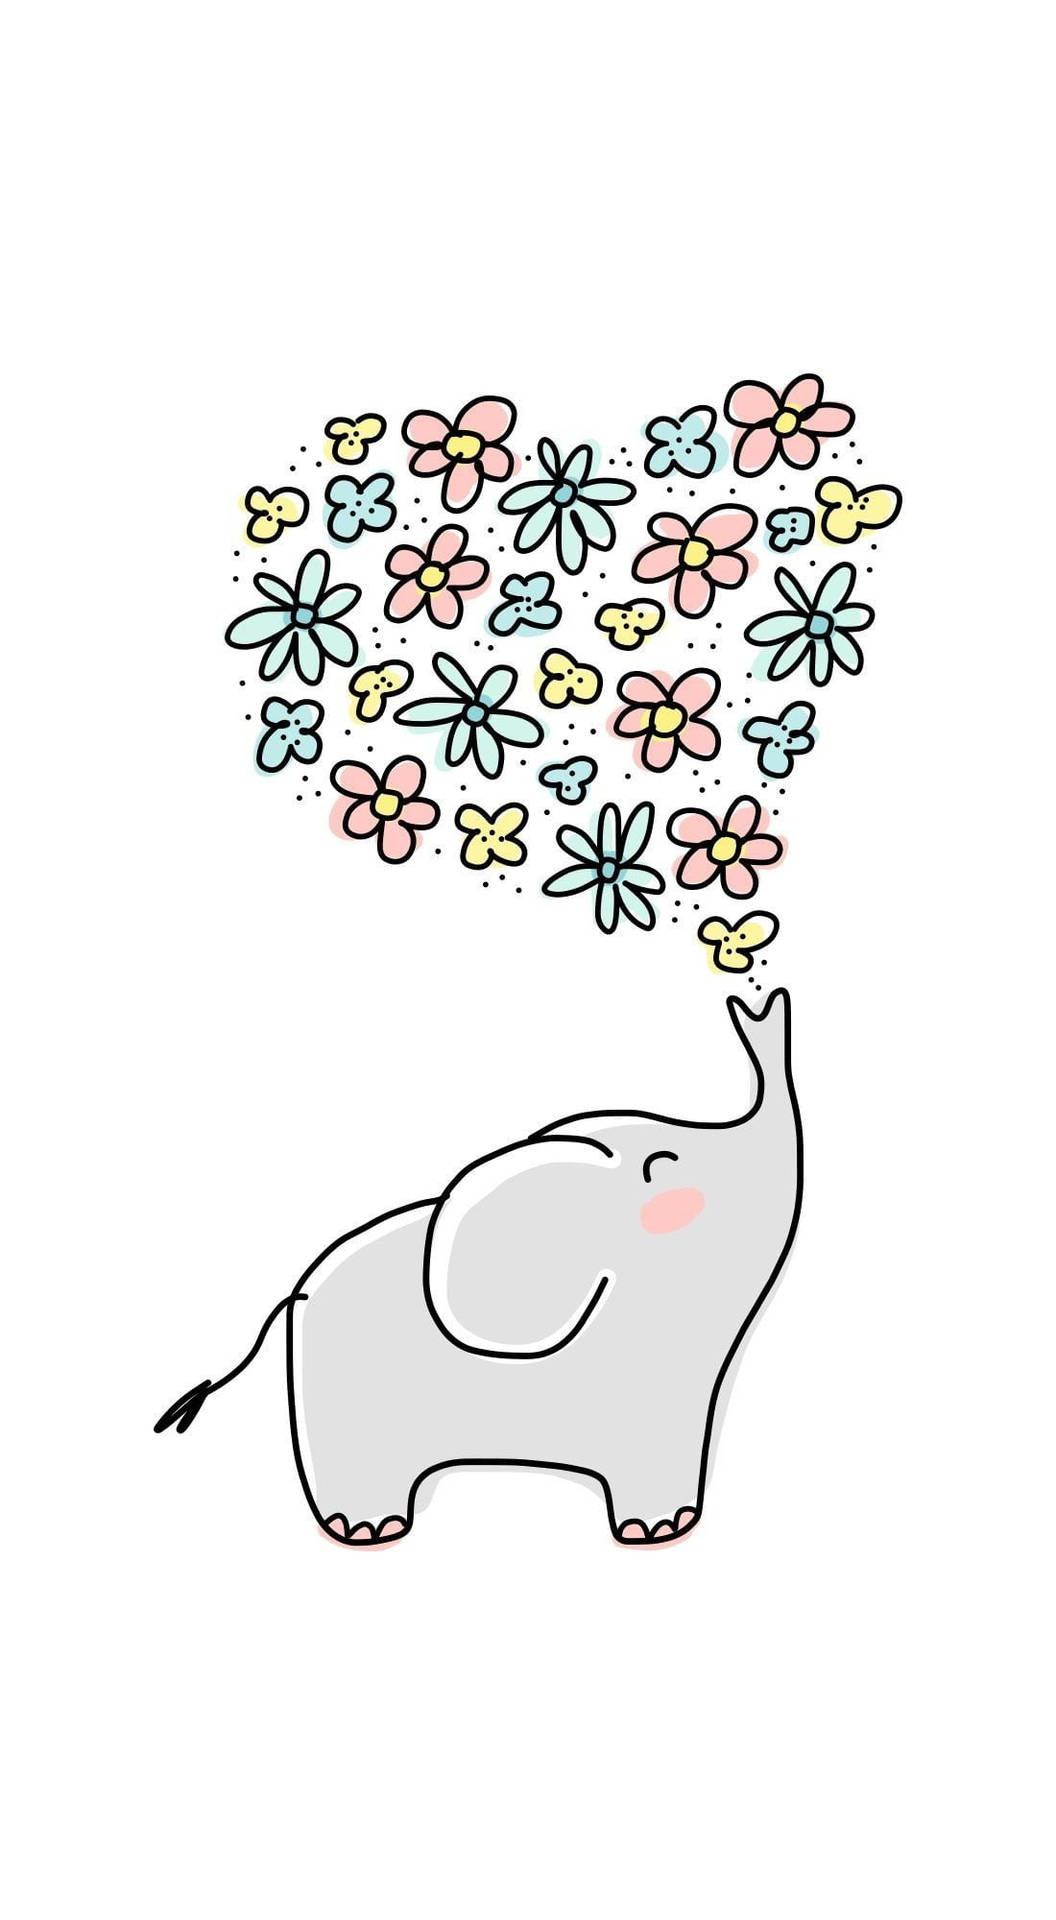 A drawing of a cute elephant blowing flowers - Elephant